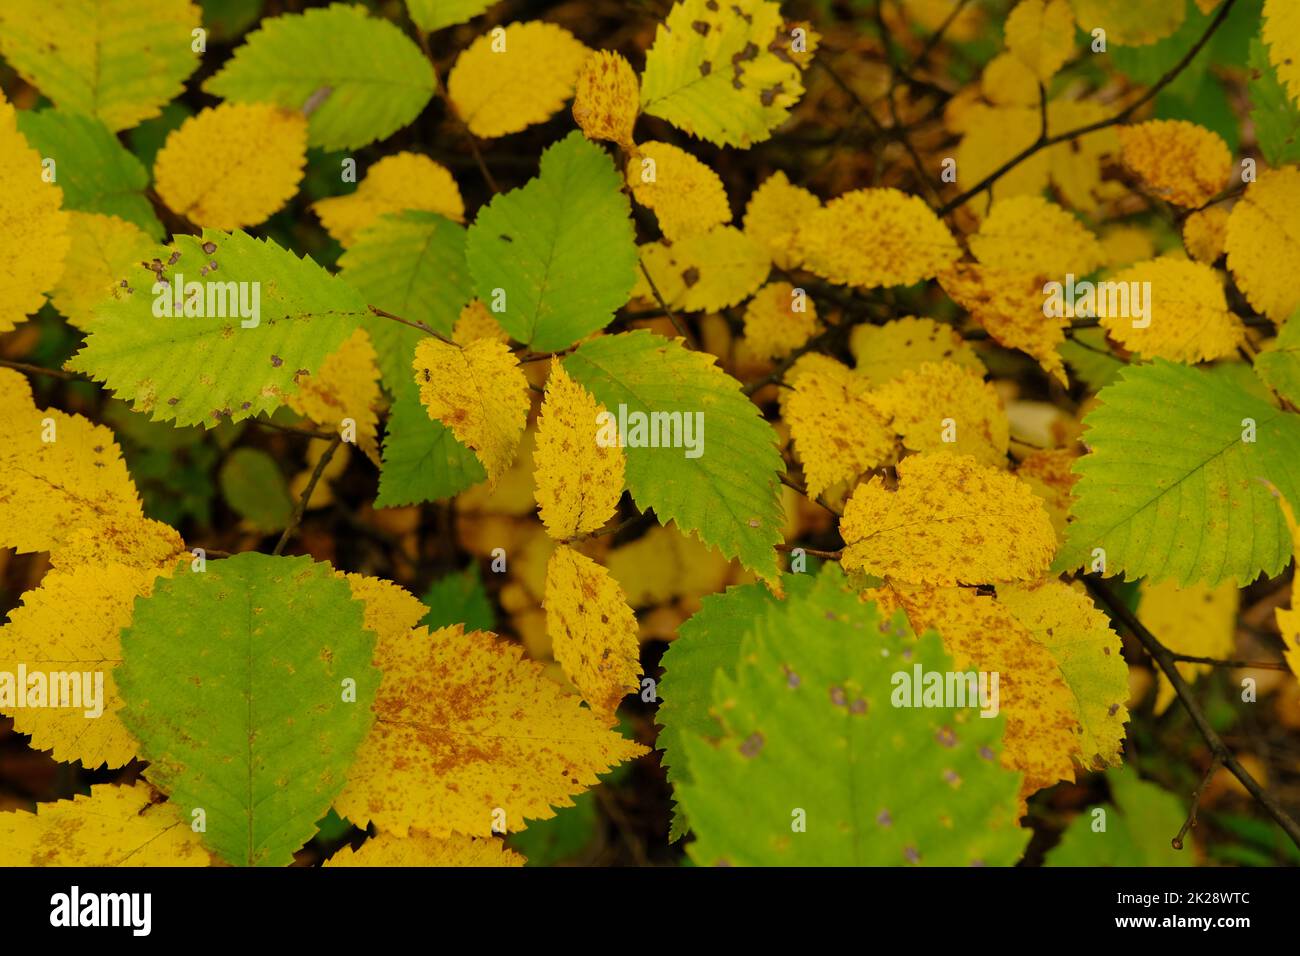 Autumn leaves on the sun. Fall blurred background. Yellow and green leaves Stock Photo